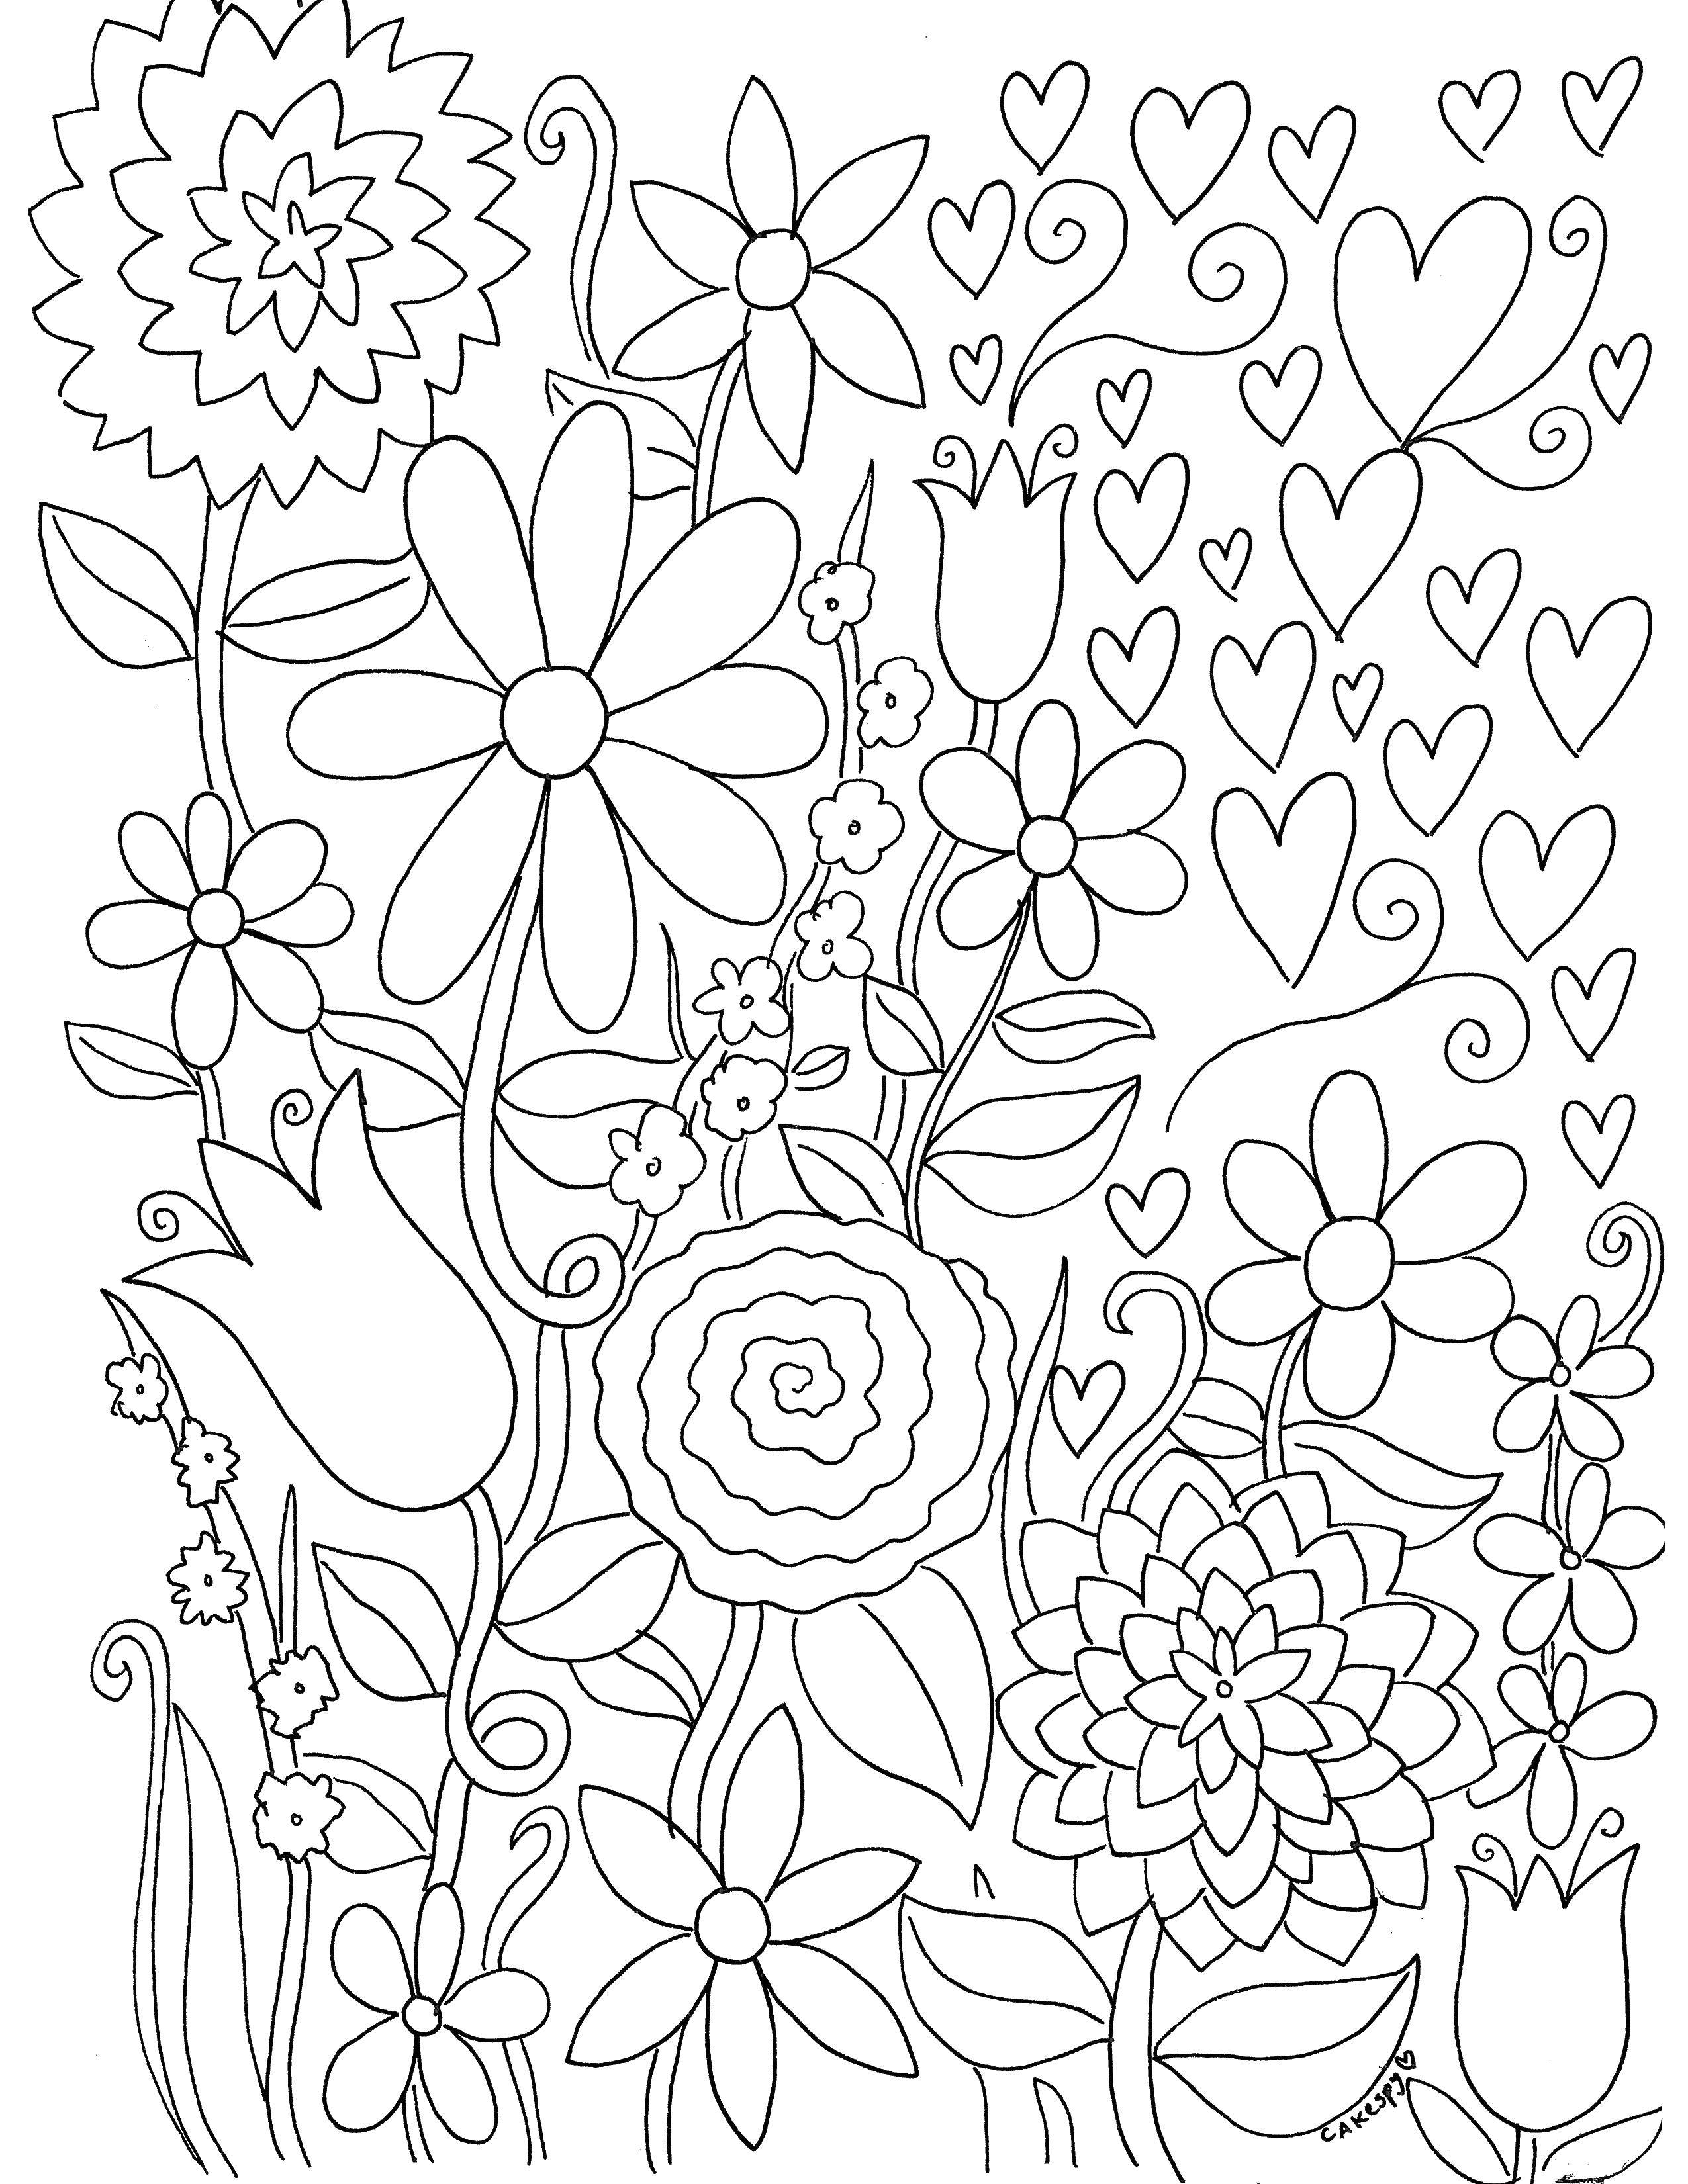 Coloring Hearts and flowers. Category flowers. Tags:  the flowers , leaves, hearts.